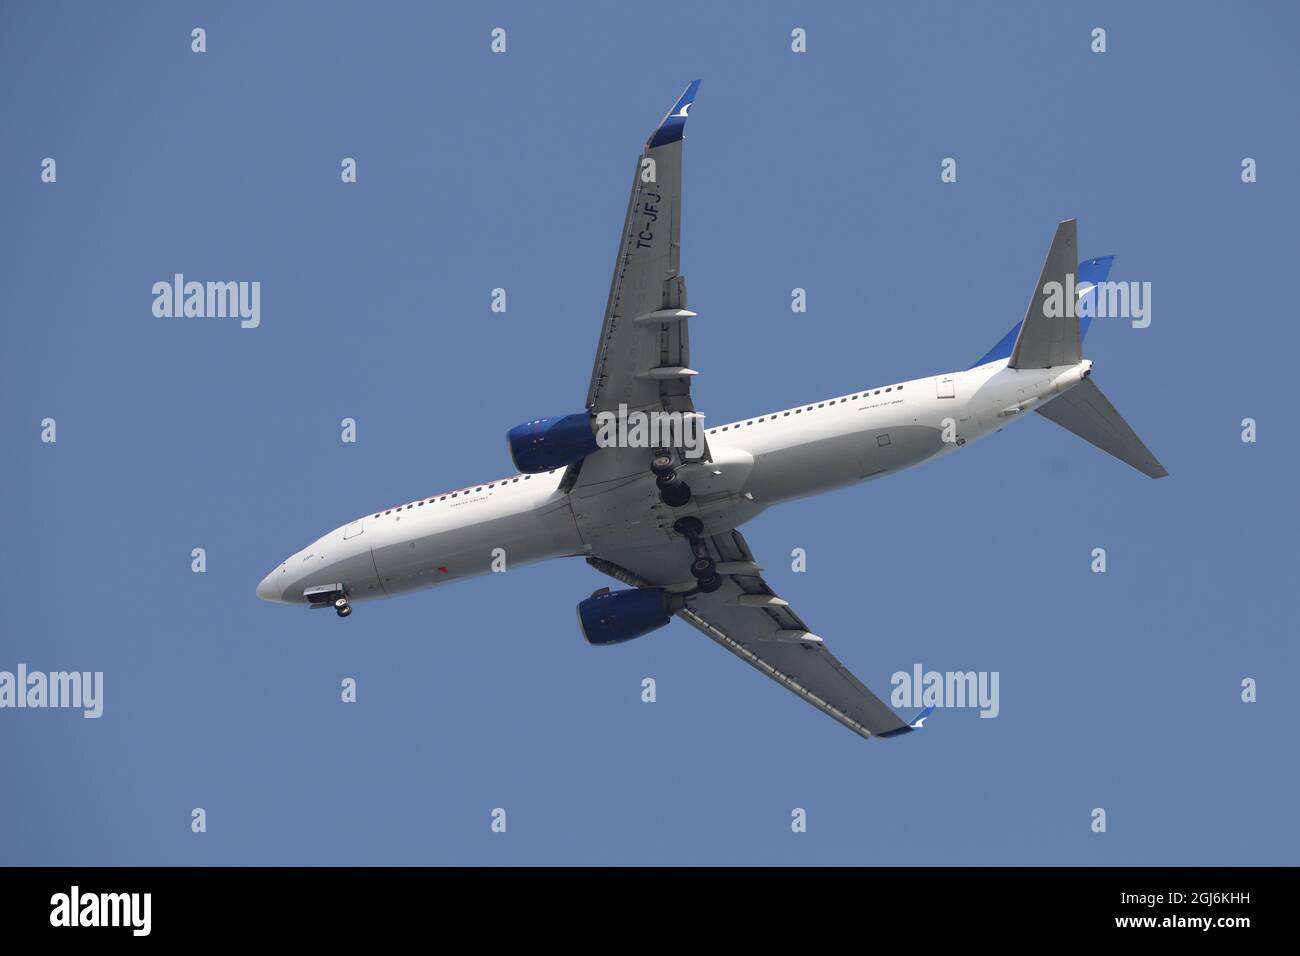 ISTANBUL, TURKEY - MAY 24, 2021: AnadoluJet Airlines Boeing 737-8F2 (CN 29772) landing to Istanbul Sabiha Gokcen Airport. Stock Photo